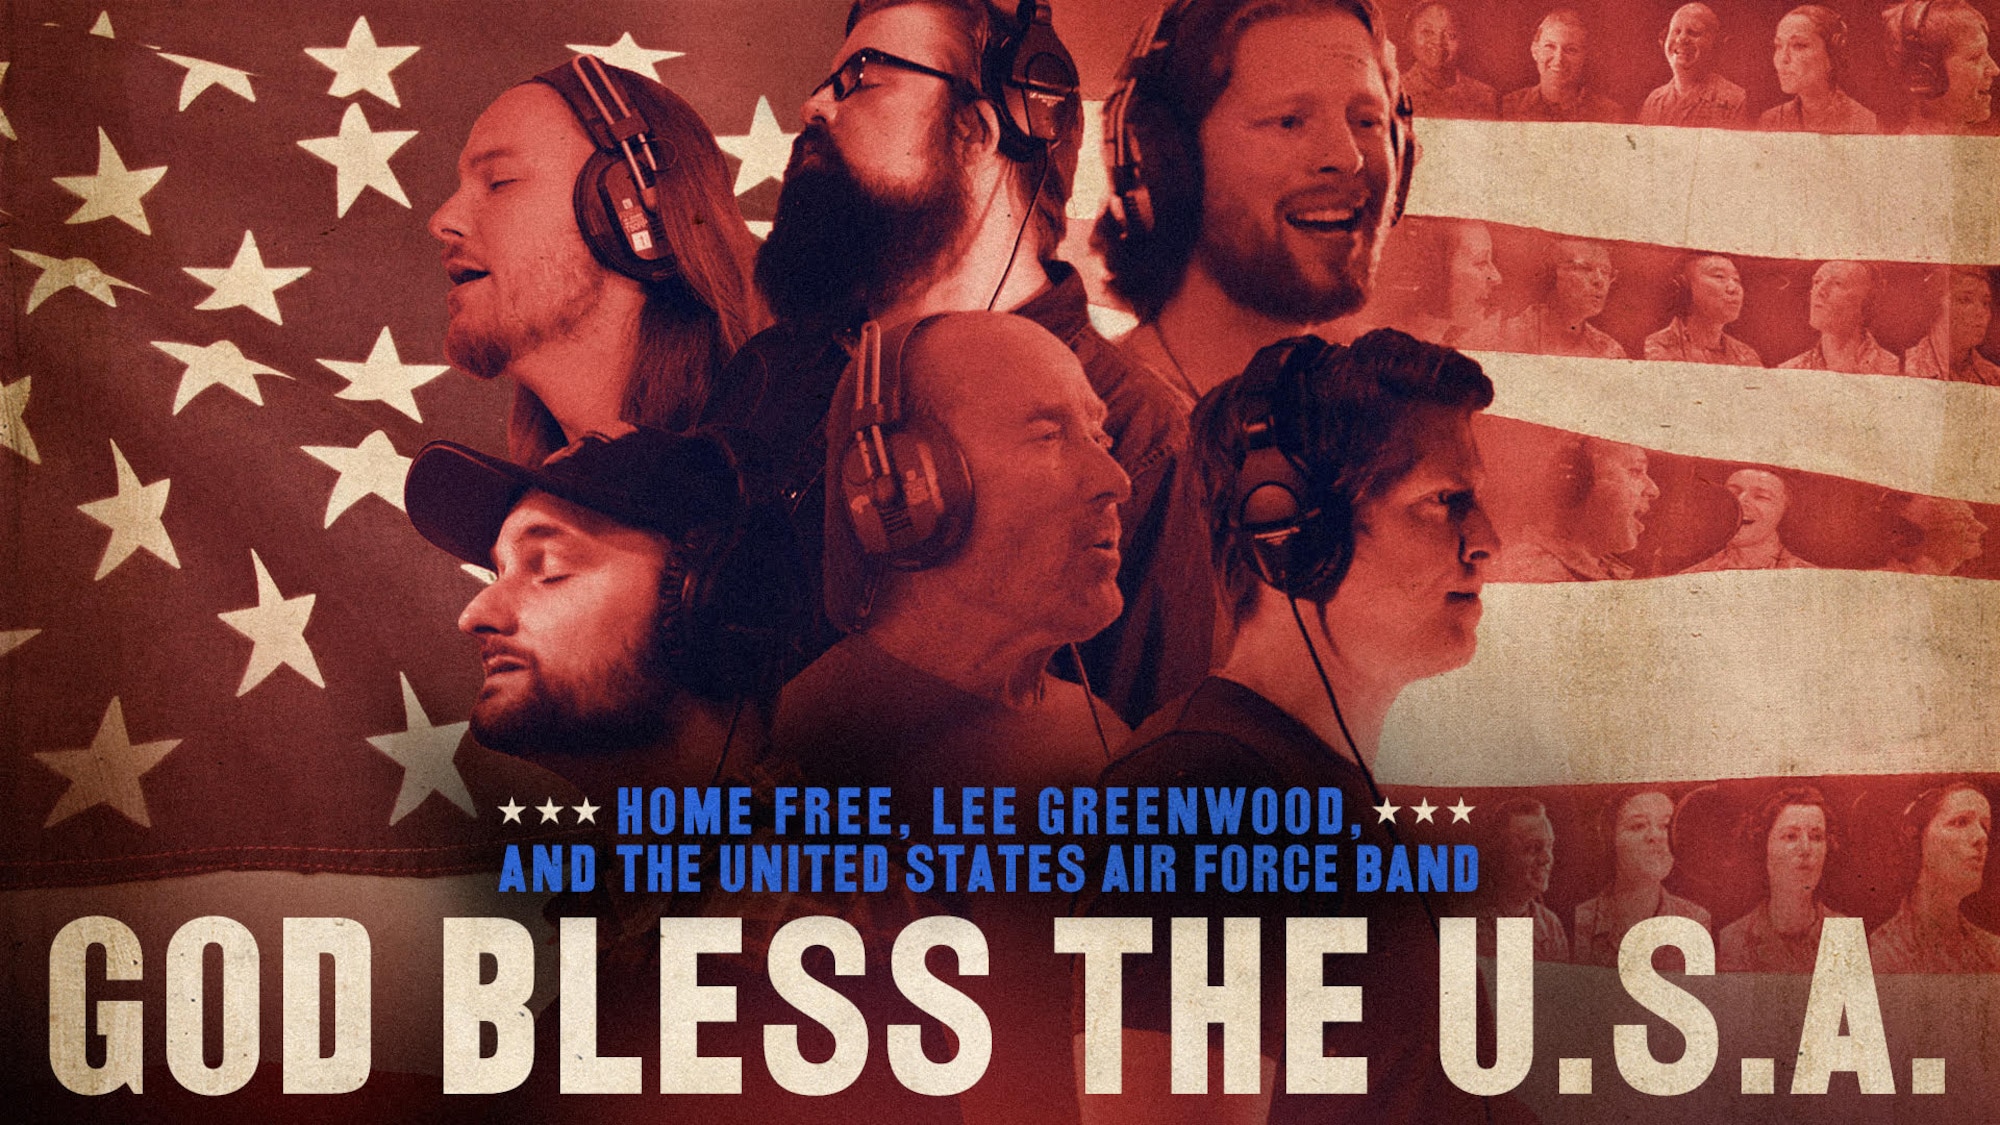 "God Bless the U.S.A." is one of America's most iconic songs, so we are thrilled to have been part of history in the brand new cover of this hit, featuring Lee Greenwood, Home Free, and the Singing Sergeants!